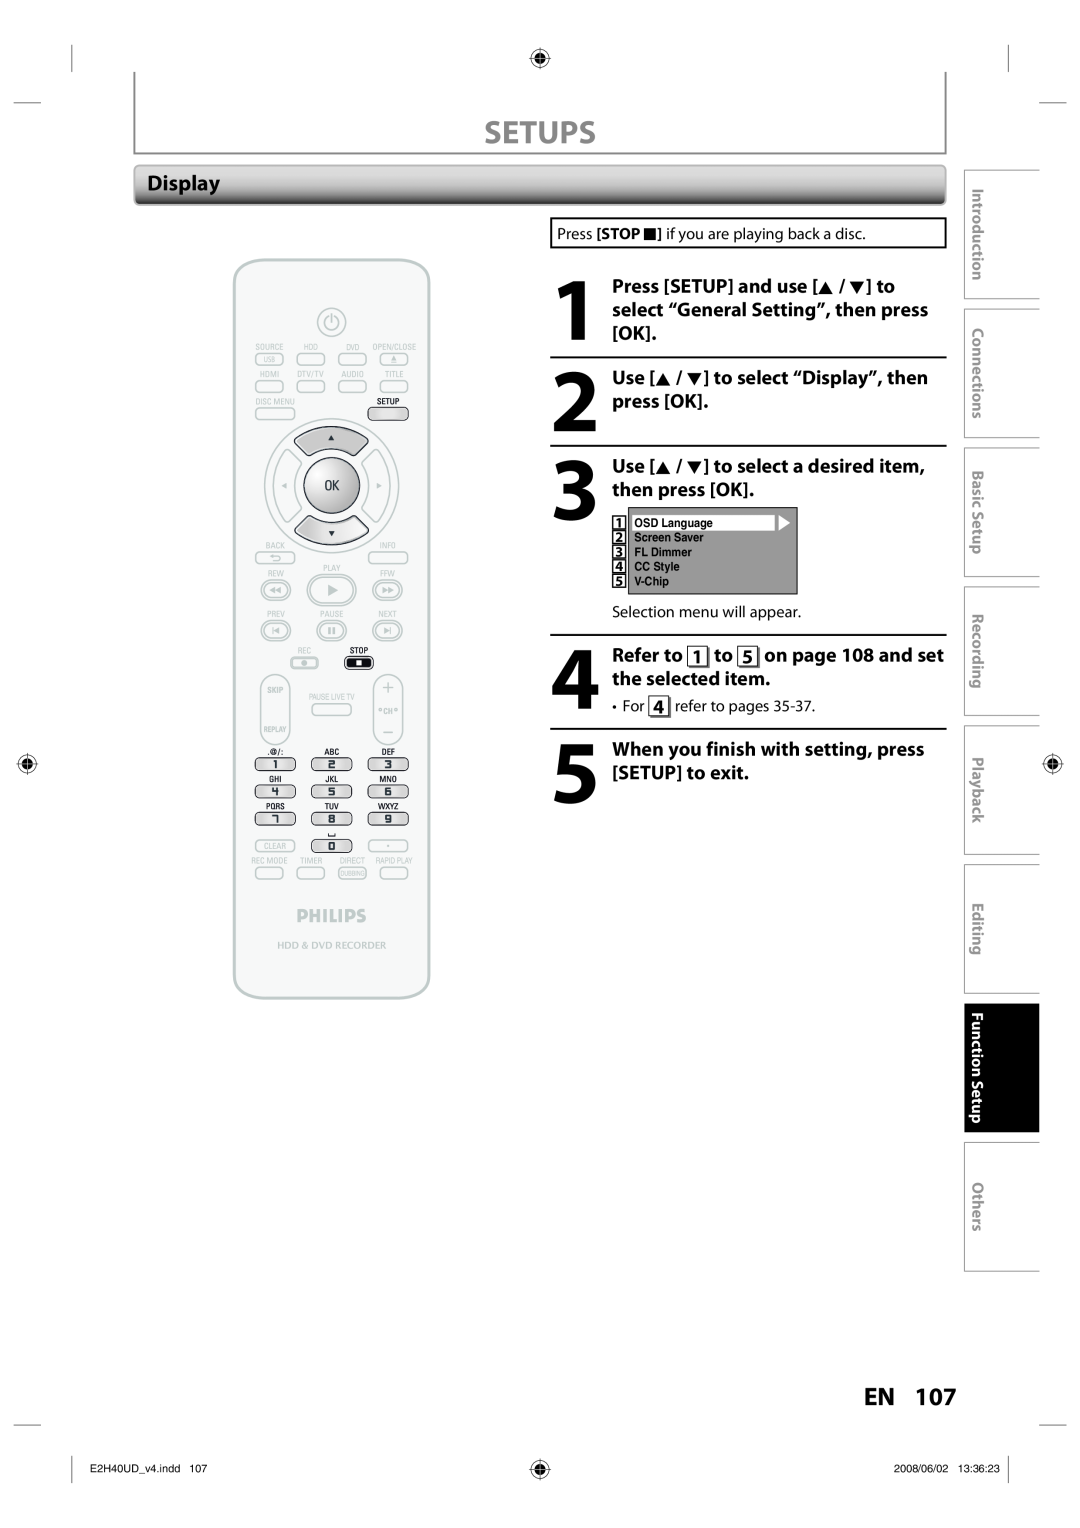 Philips DVDR3575H/37 manual Display, Refer to 1 to 5 on page 108 and set the selected item, Setups, then press OK 